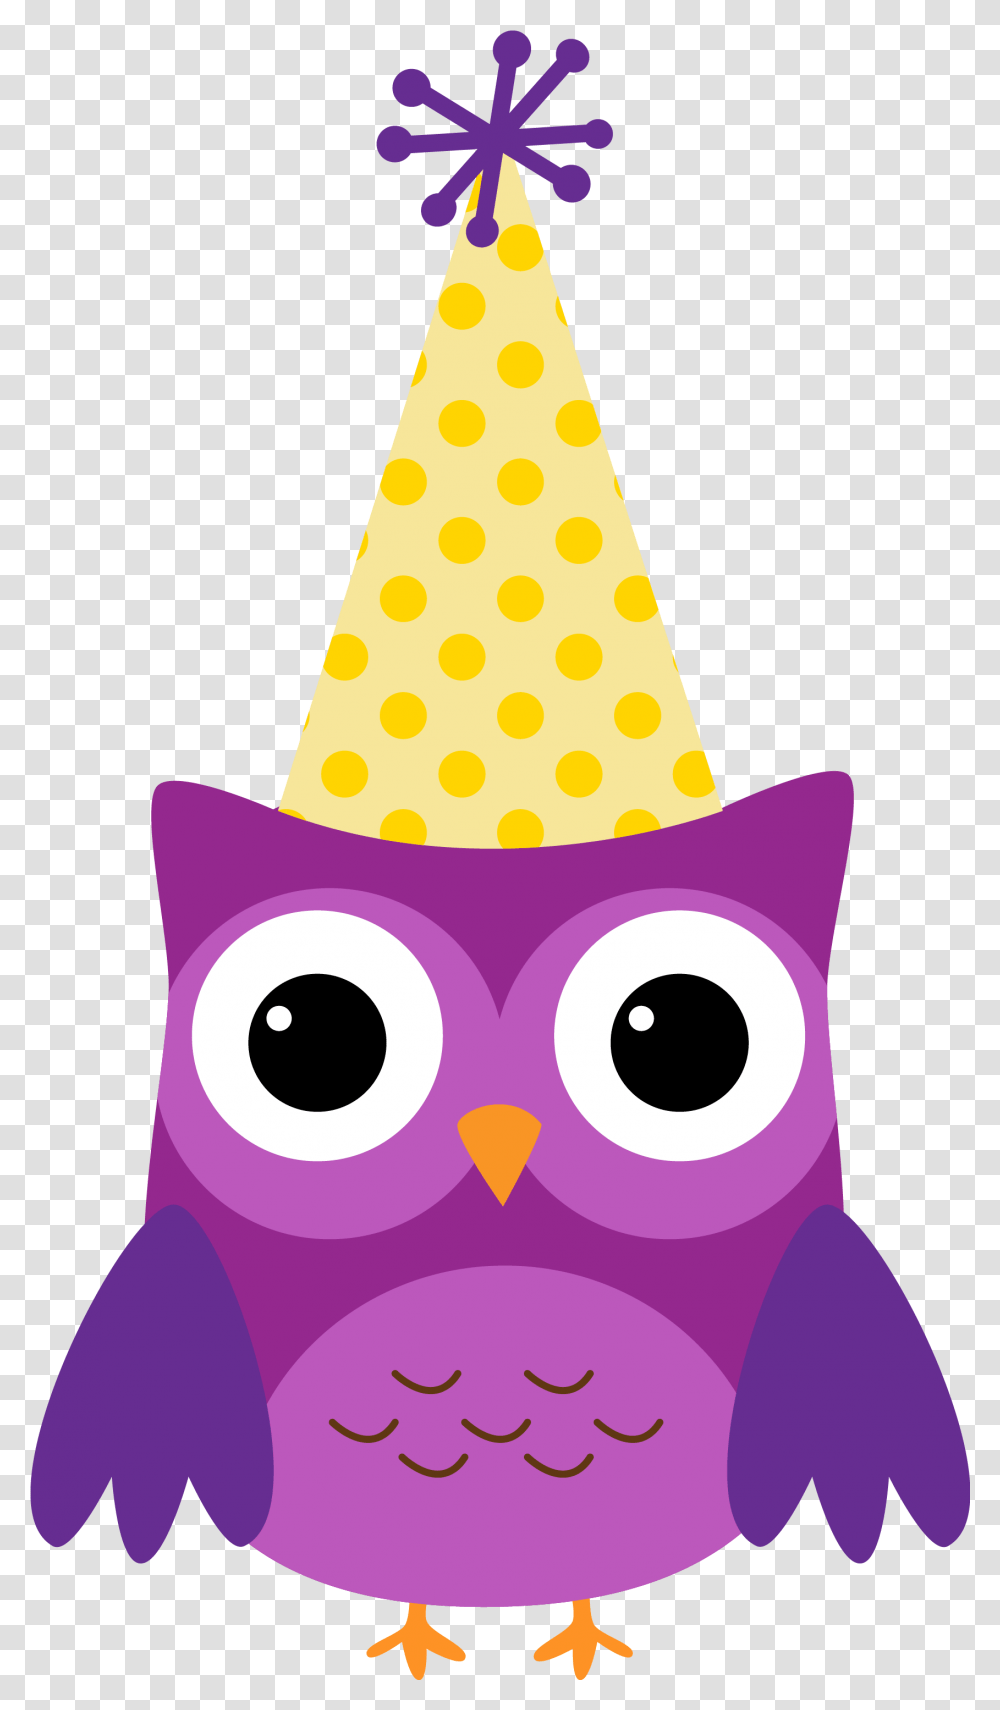 Corujas 3 Owl6png Minus Imgenes De Bho Cute Birthday Owl Clipart, Clothing, Apparel, Party Hat Transparent Png